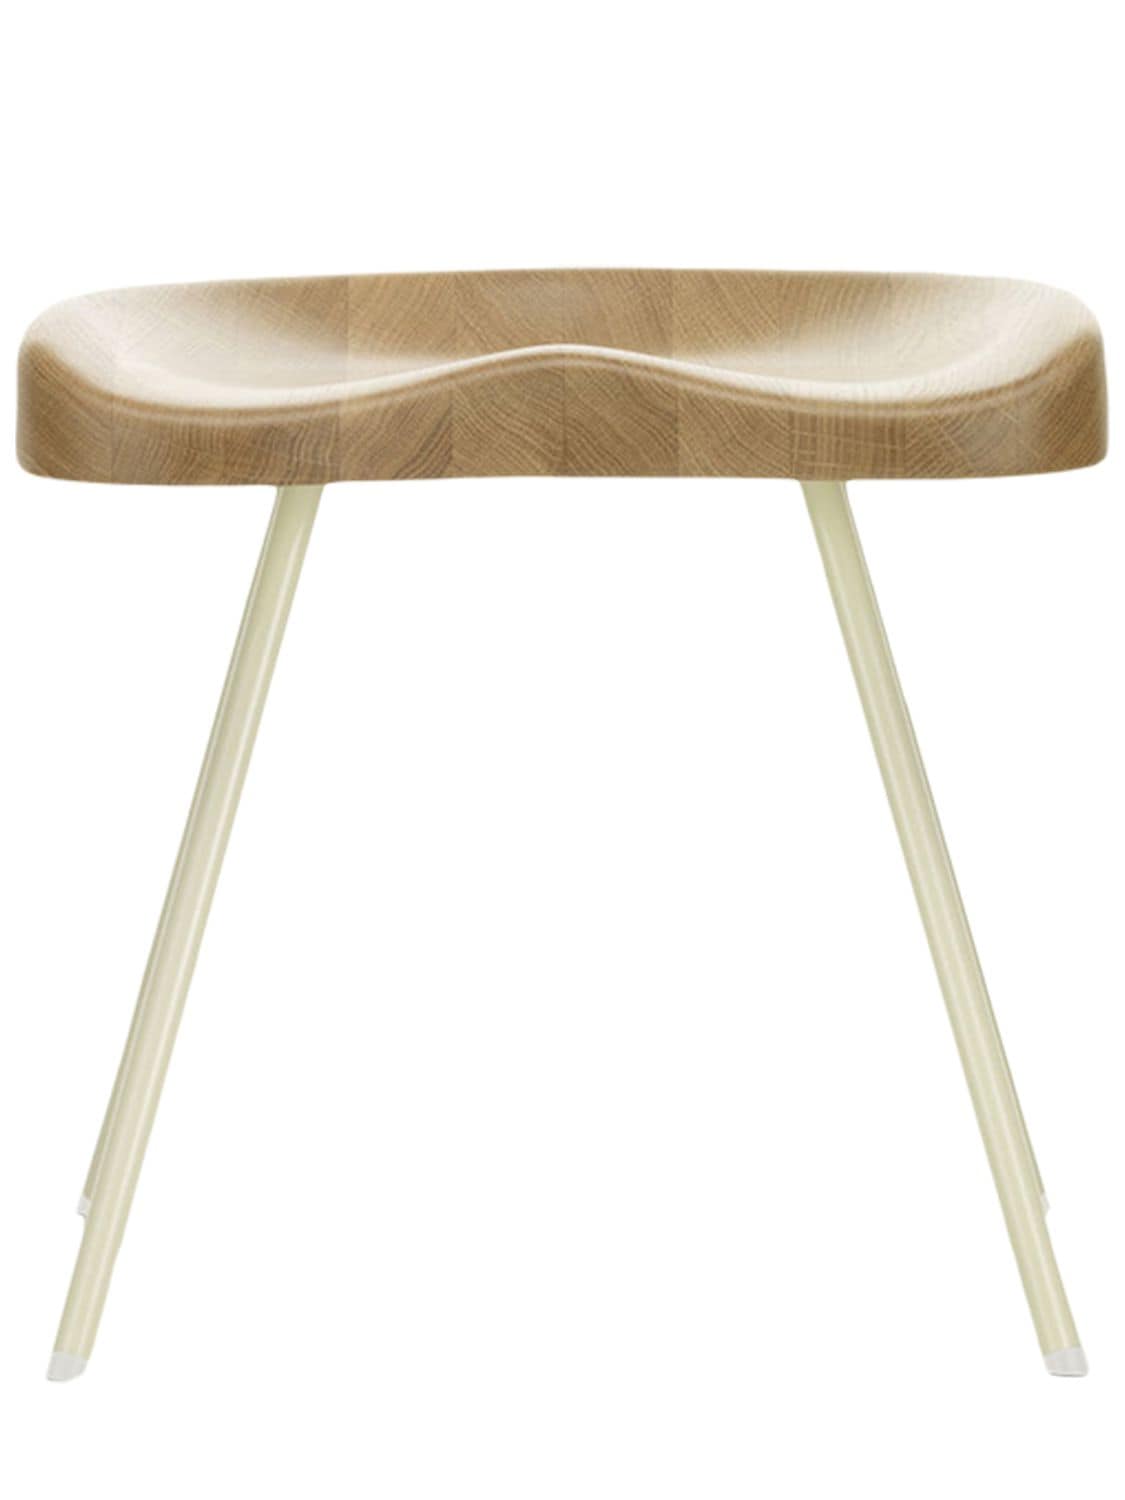 Image of Tabouret 307 Stool